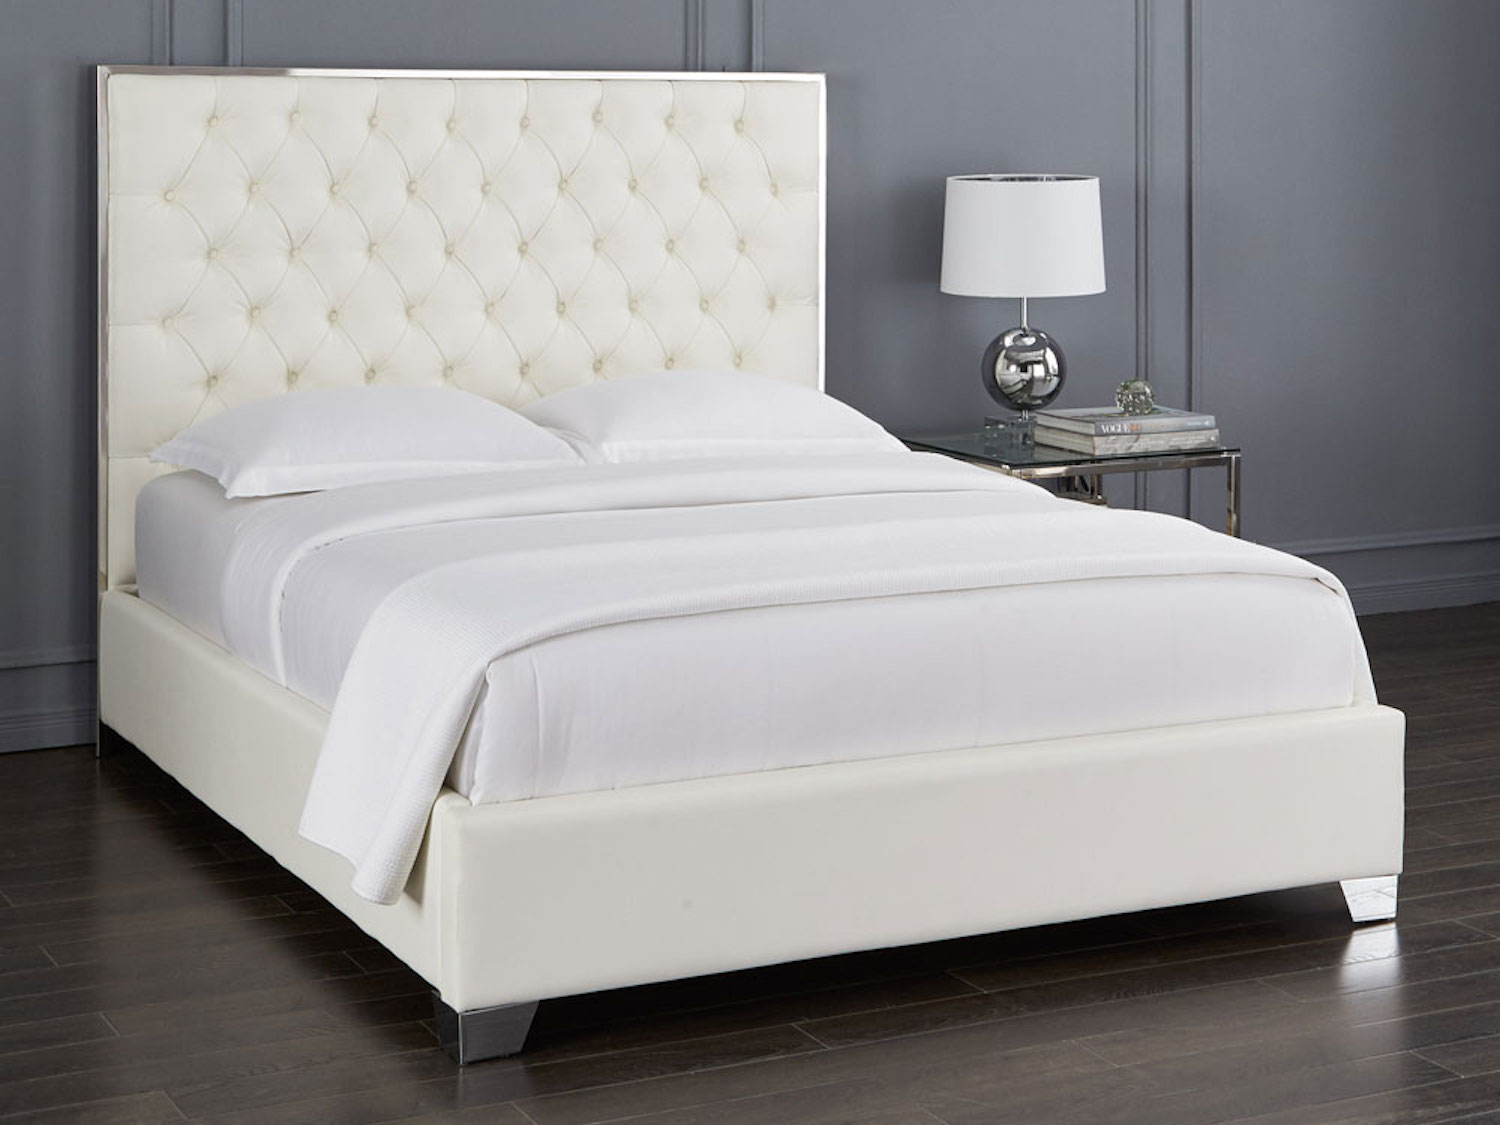 Xcella Kroma Modern White Leatherette Queen Bed